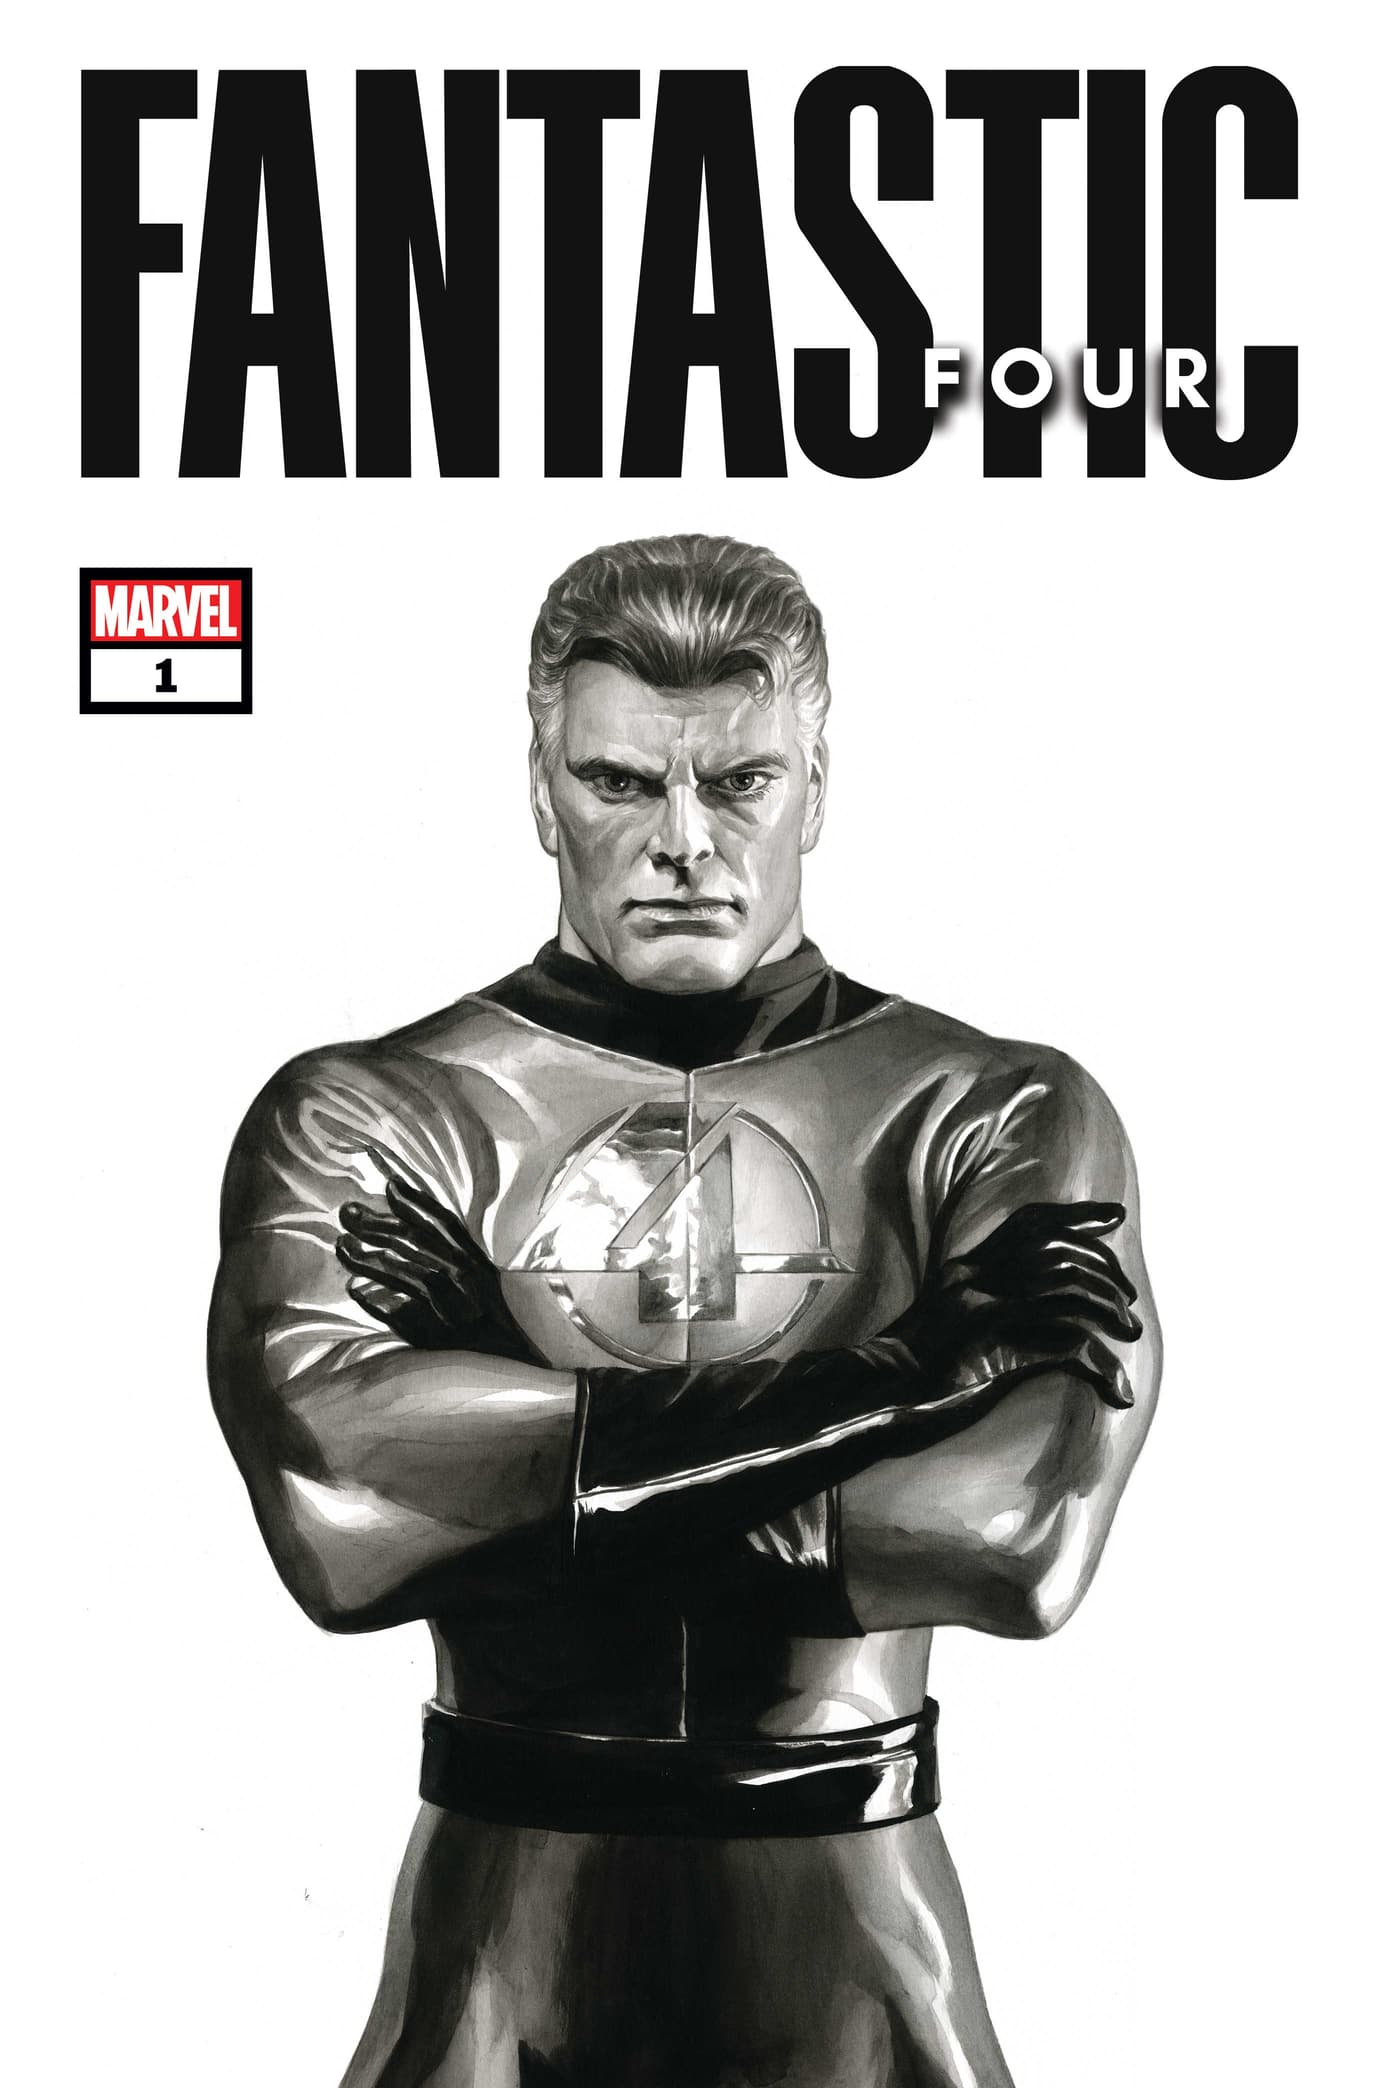 FANTASTIC FOUR #1 Solo Variant Cover by Alex Ross